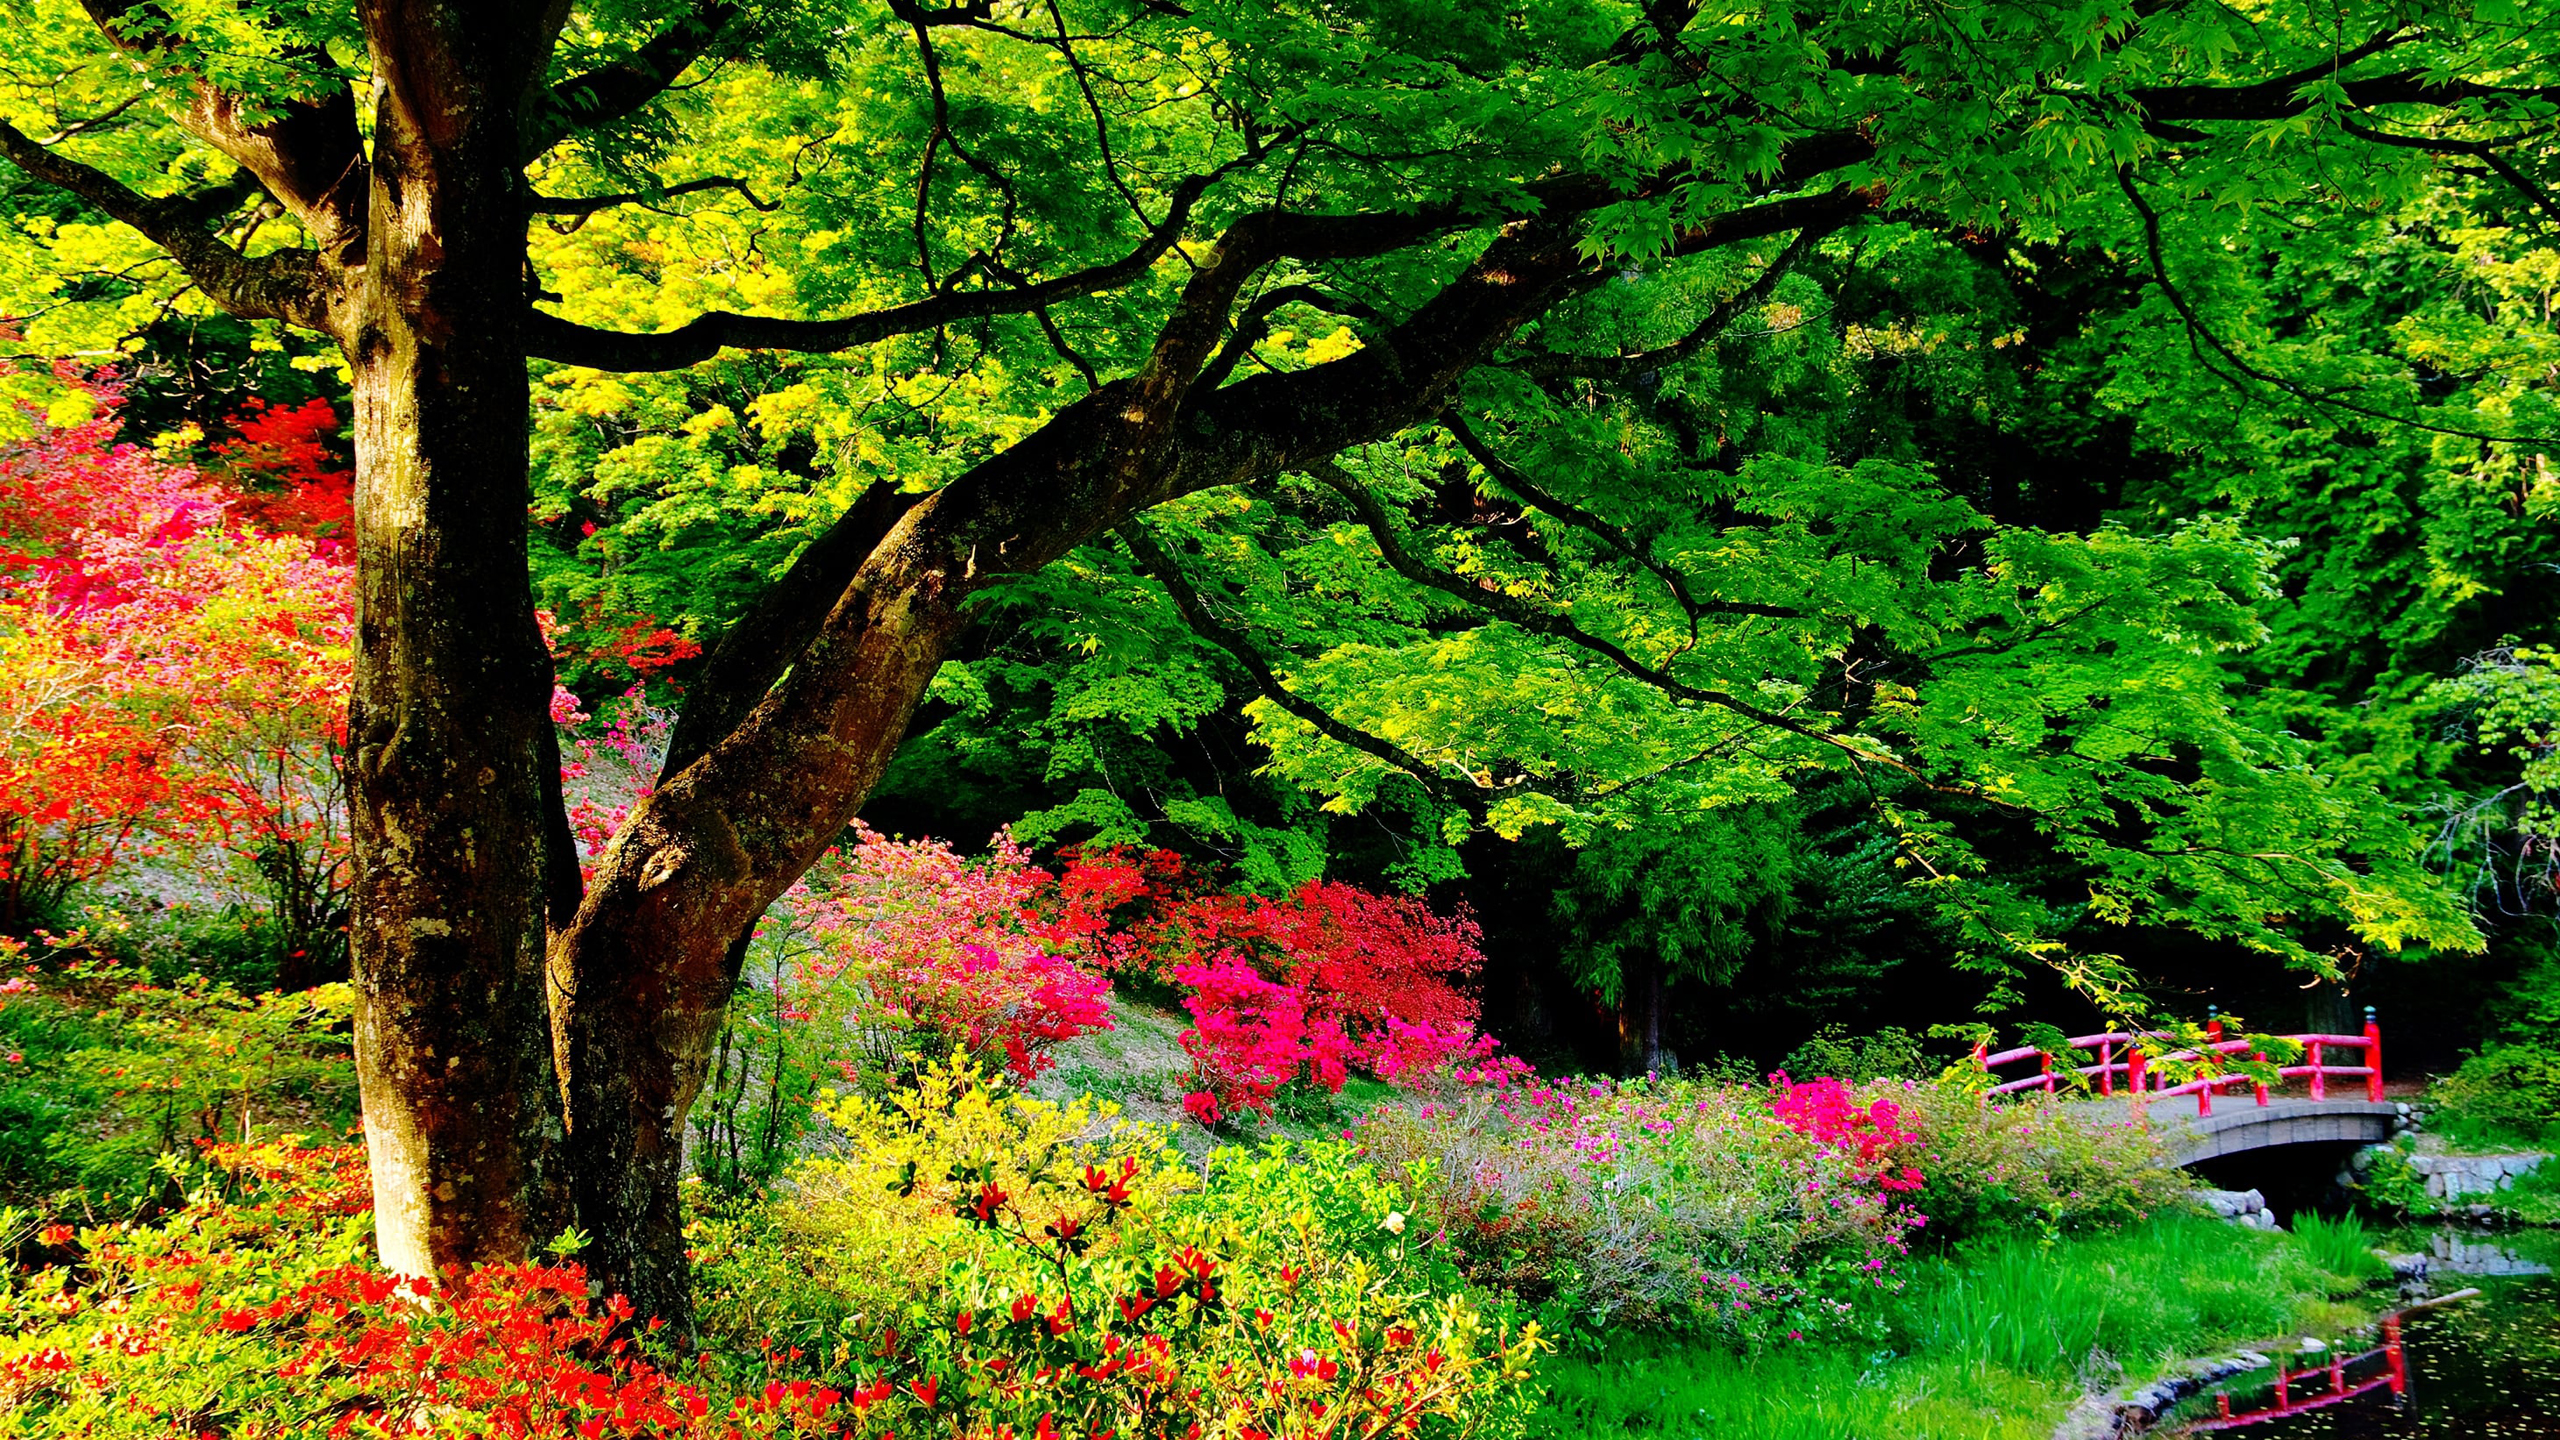 Colorful Flowers Beautiful Garden Green Trees Branches Bridge Plants Bushes 2K Nature